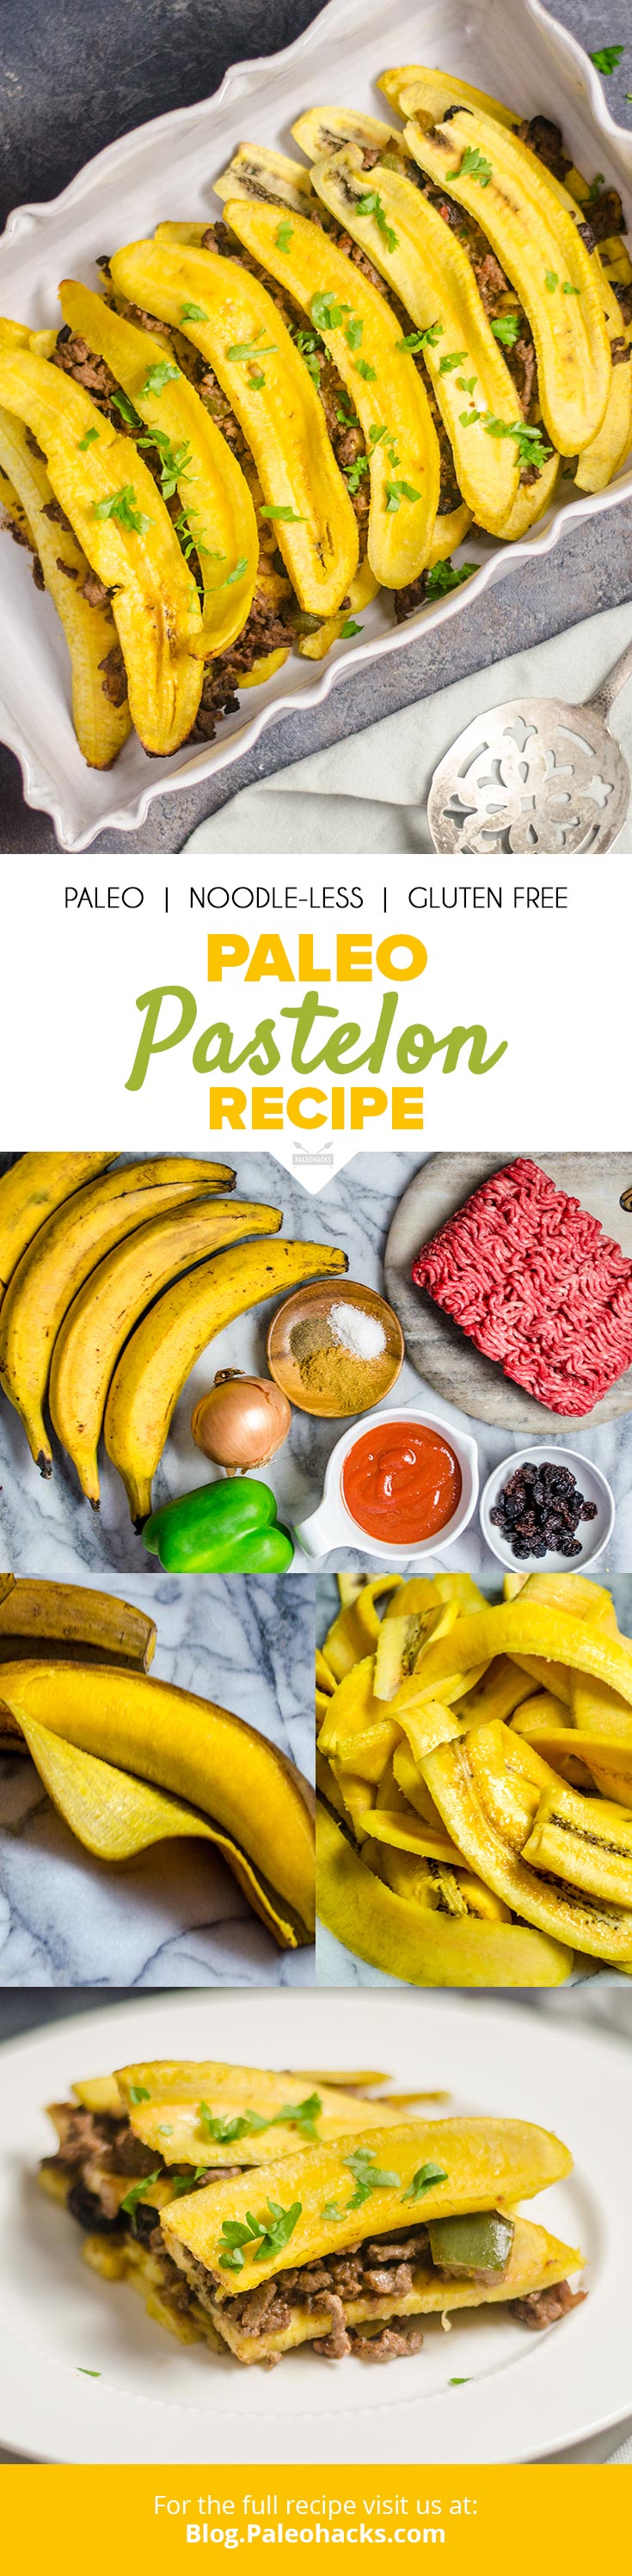 The delicate sweetness of ripe plantains and raisins balances the savory flavors of spiced minced beef in this Paleo Pastelón recipe.